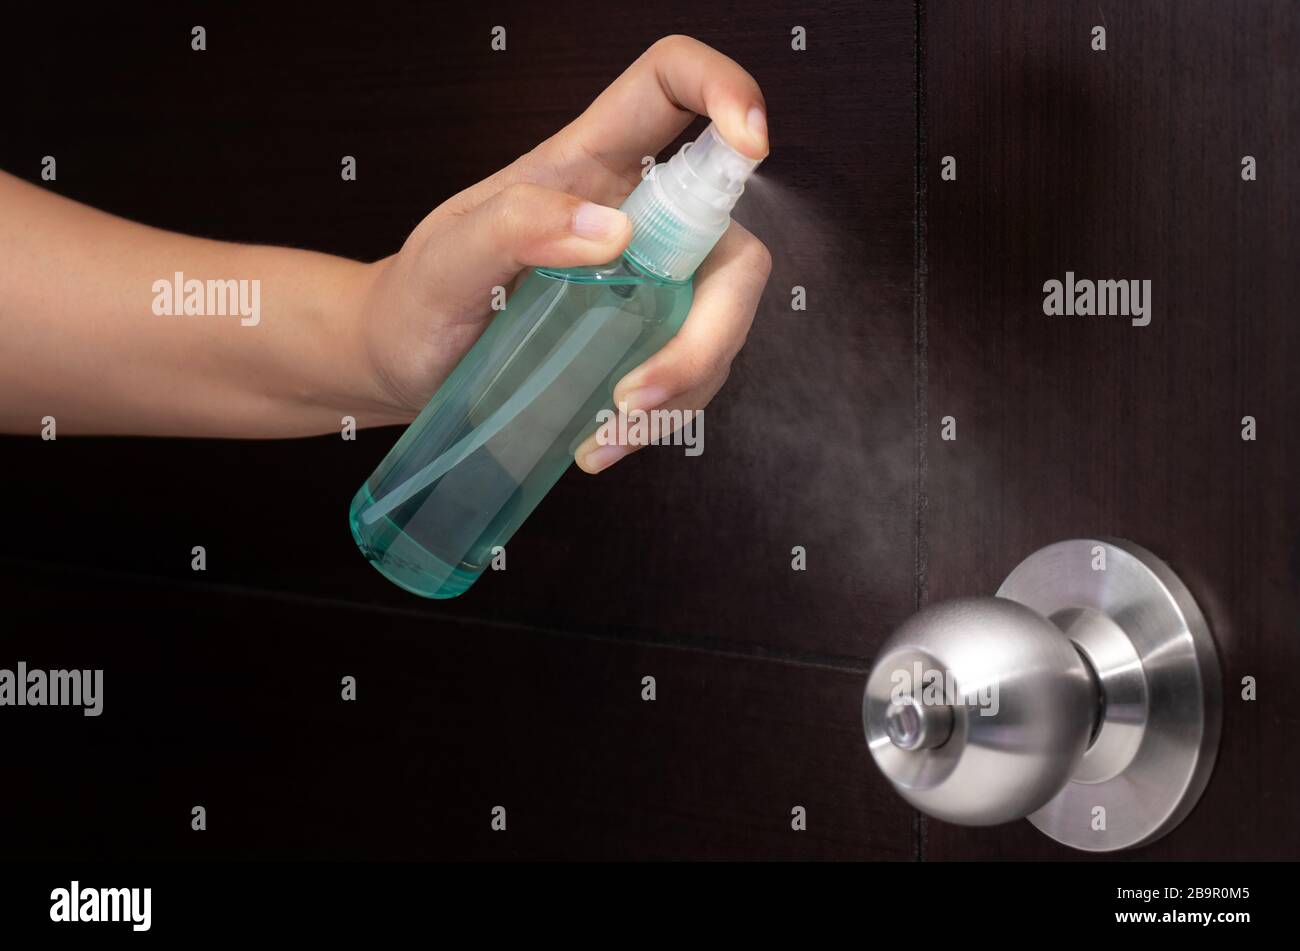 disinfect, sanitize, hygiene care. inject alcohol spray on door knob and frequently touched area for cleaning and disinfection, prevention of germs sp Stock Photo